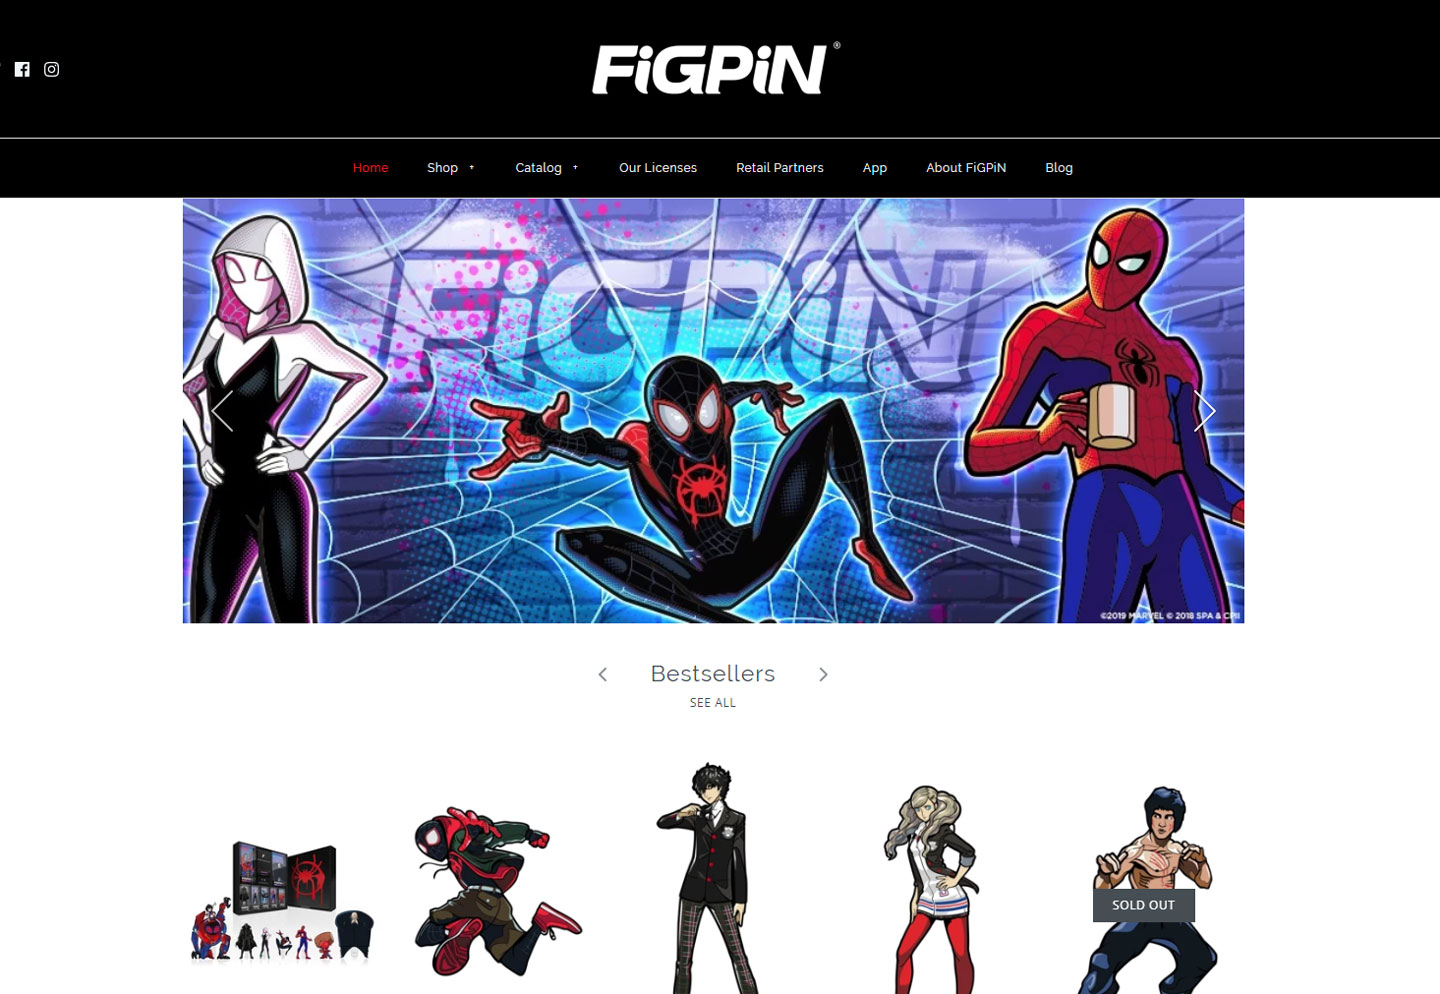 Consumer products website for FiGPiNs built on Shopify